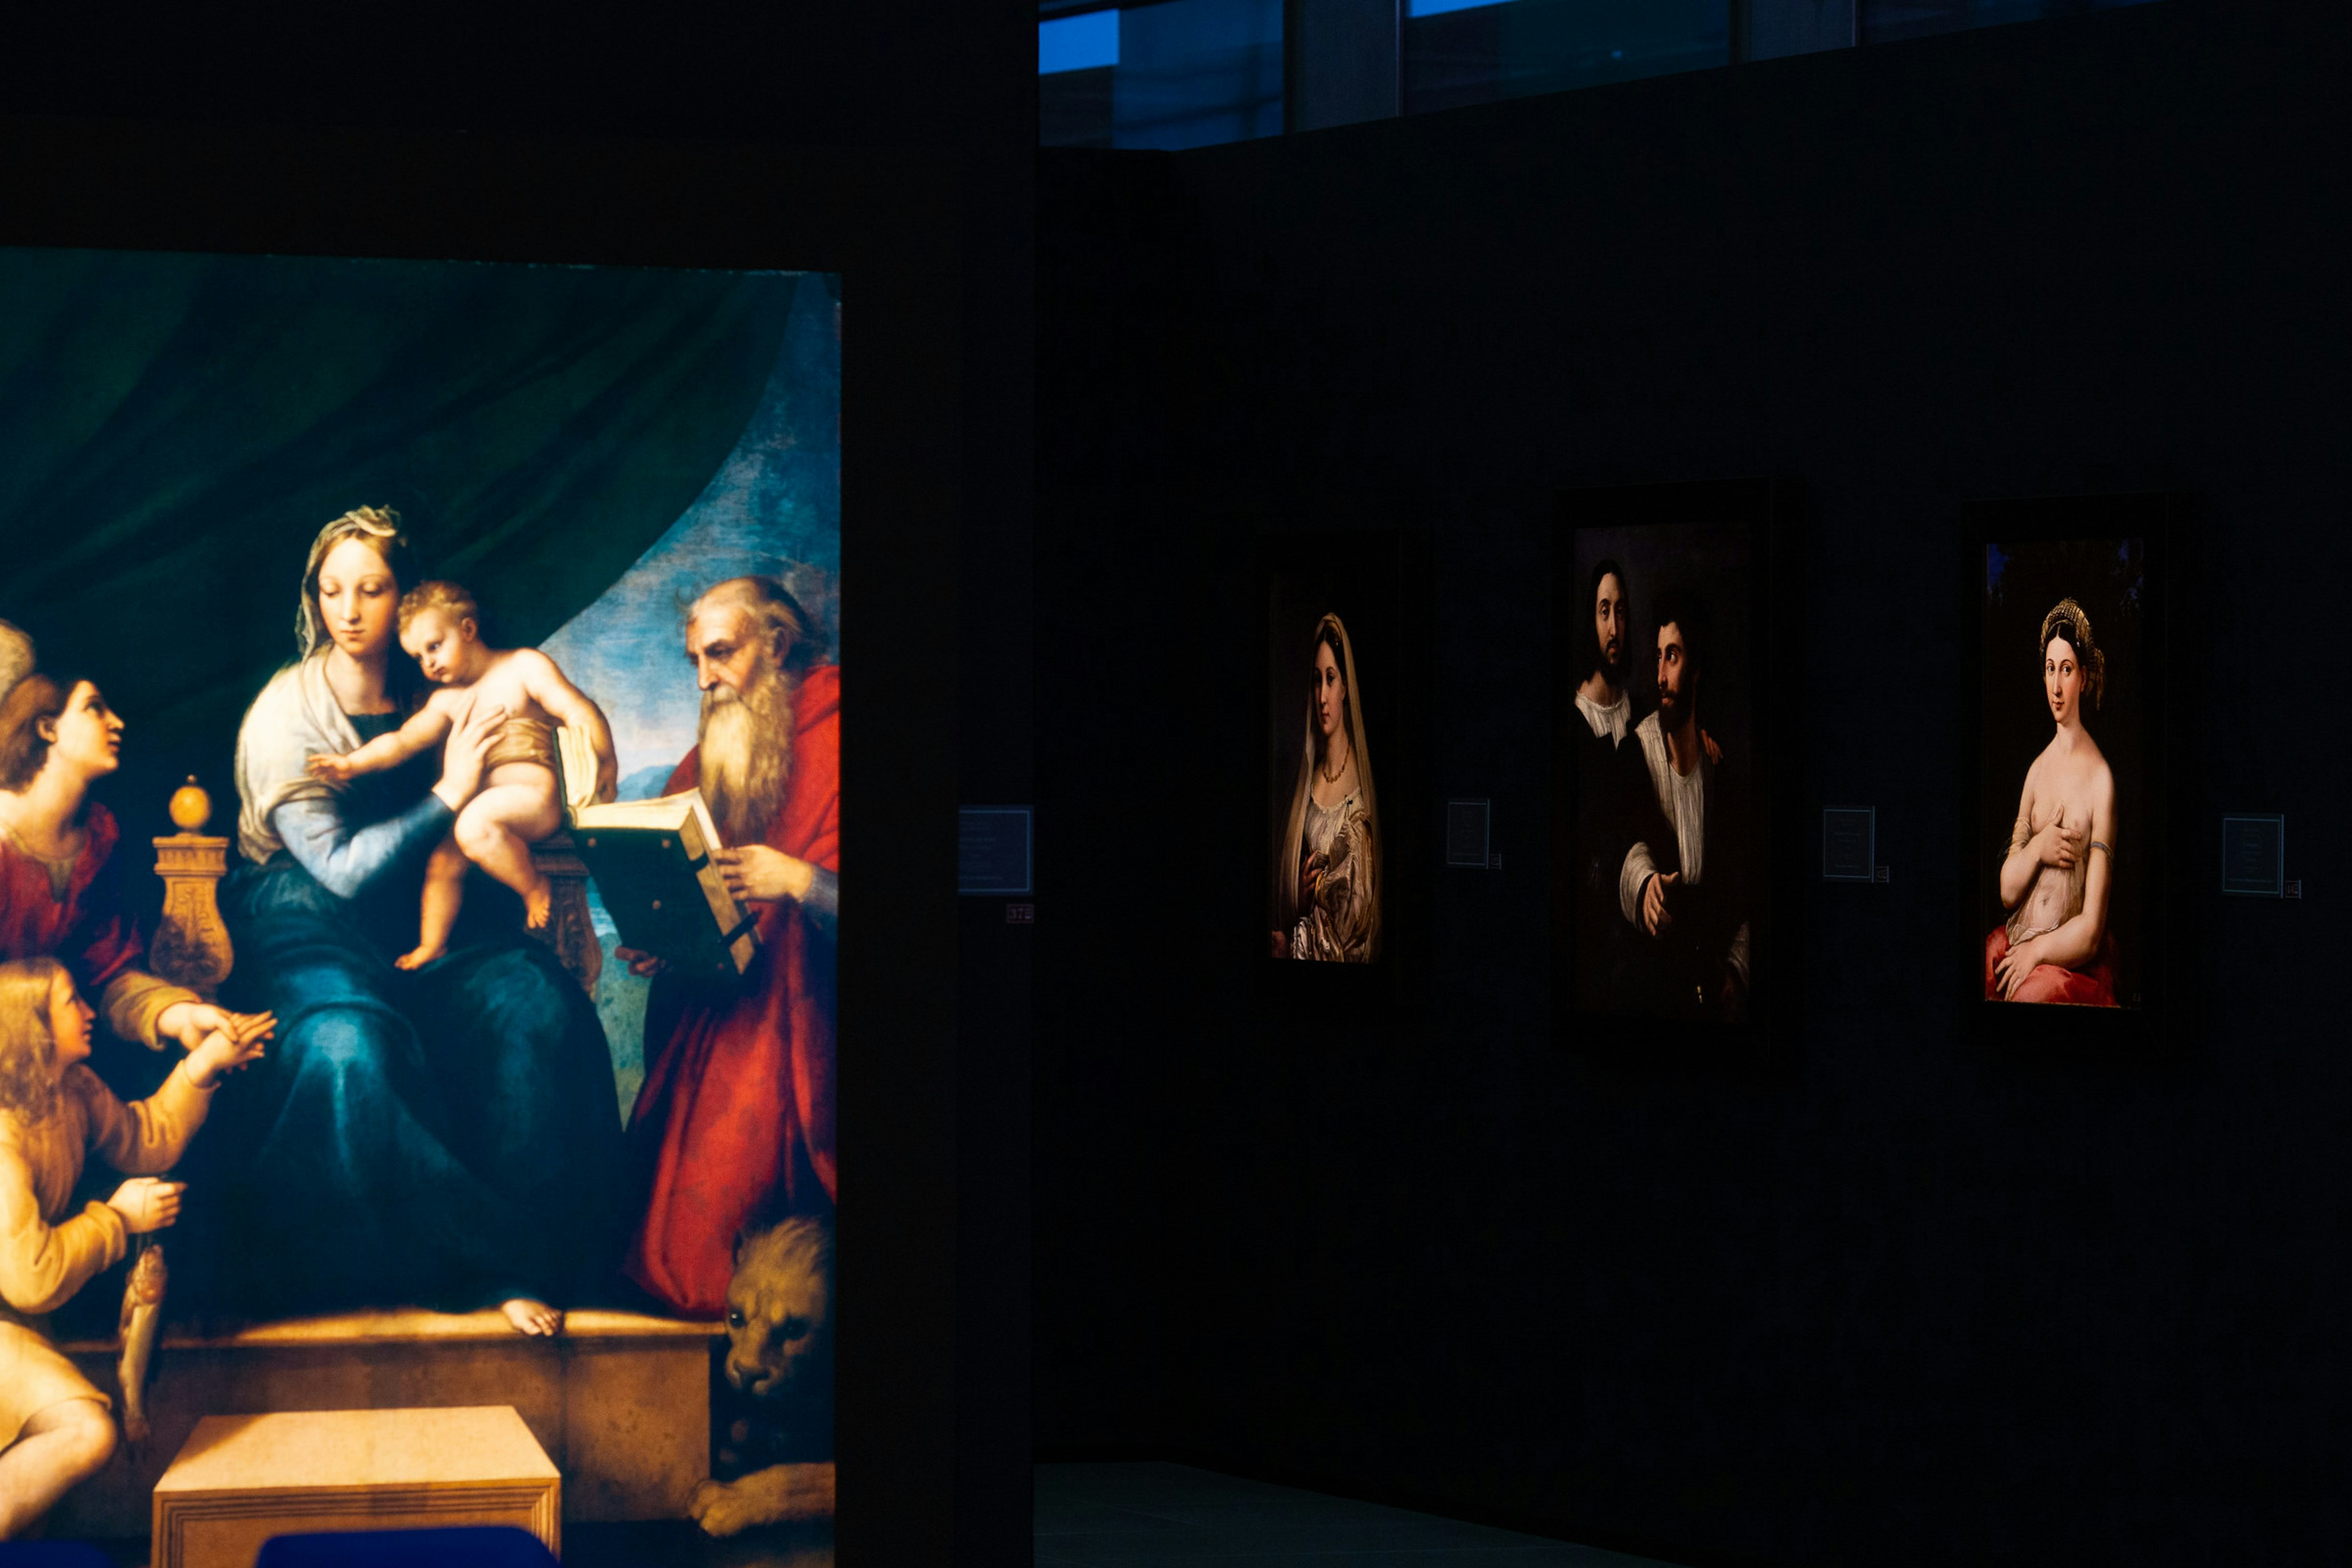 A picture of some of the reproductions featured in the exhibition against a black background